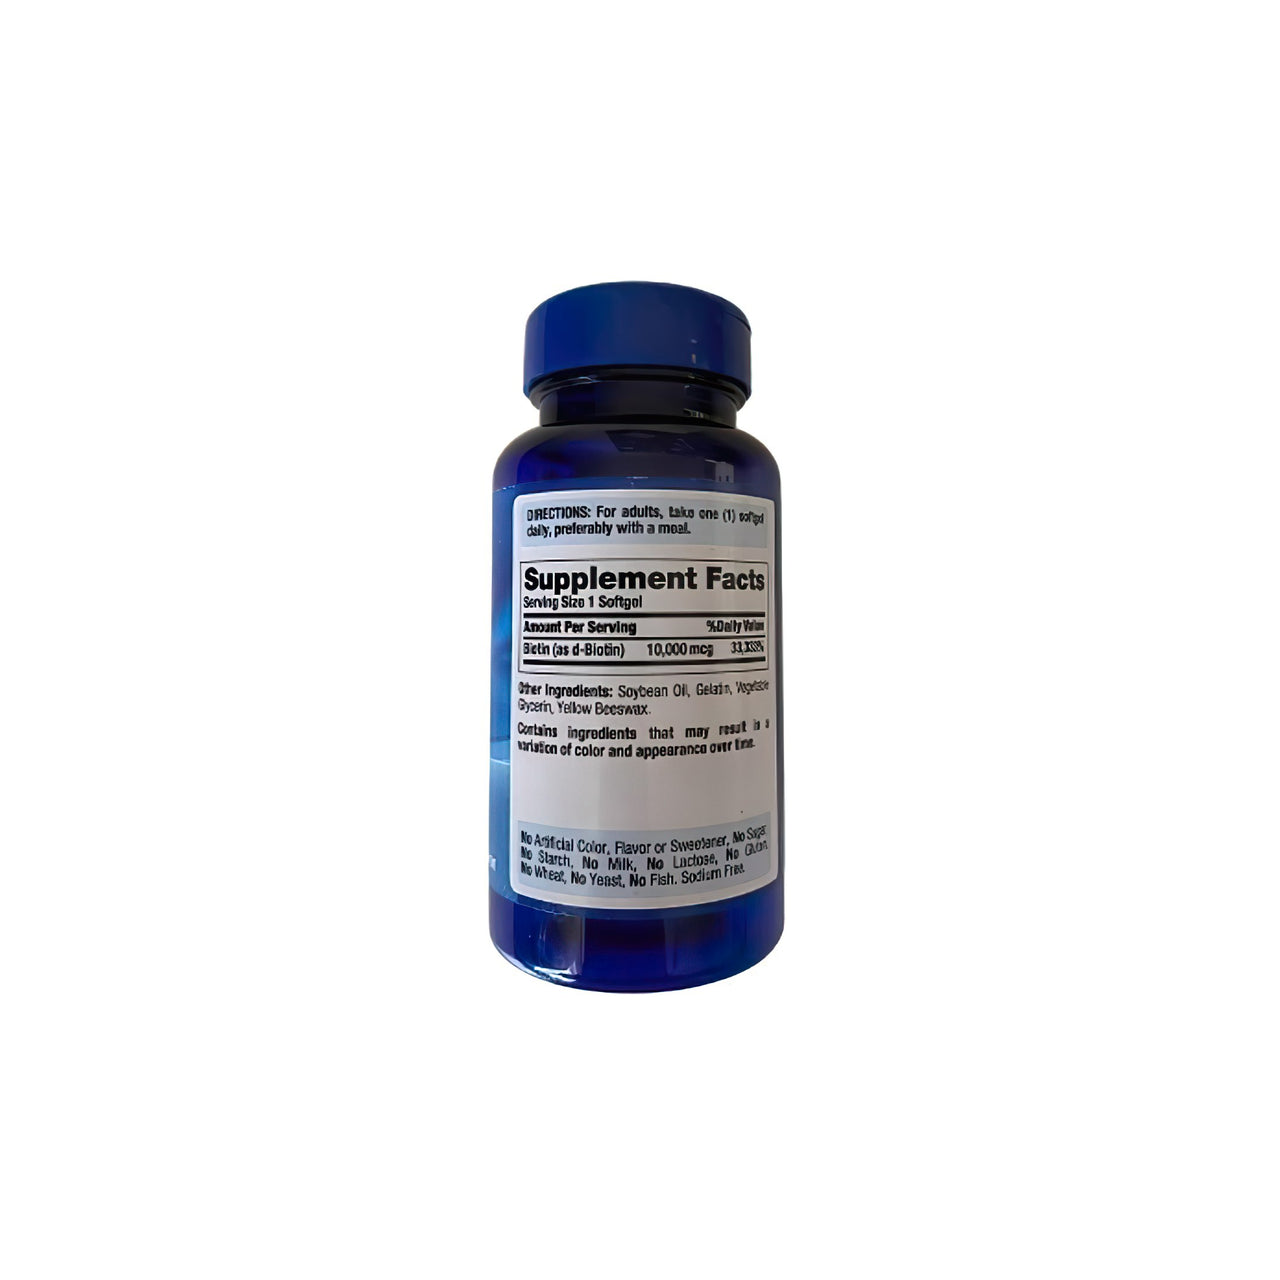 A bottle of Biotin - 10000 mcg 100 softgels, a nutrient known to boost energy levels and promote healthy hair, on a white background. (Brand Name: Puritan's Pride)